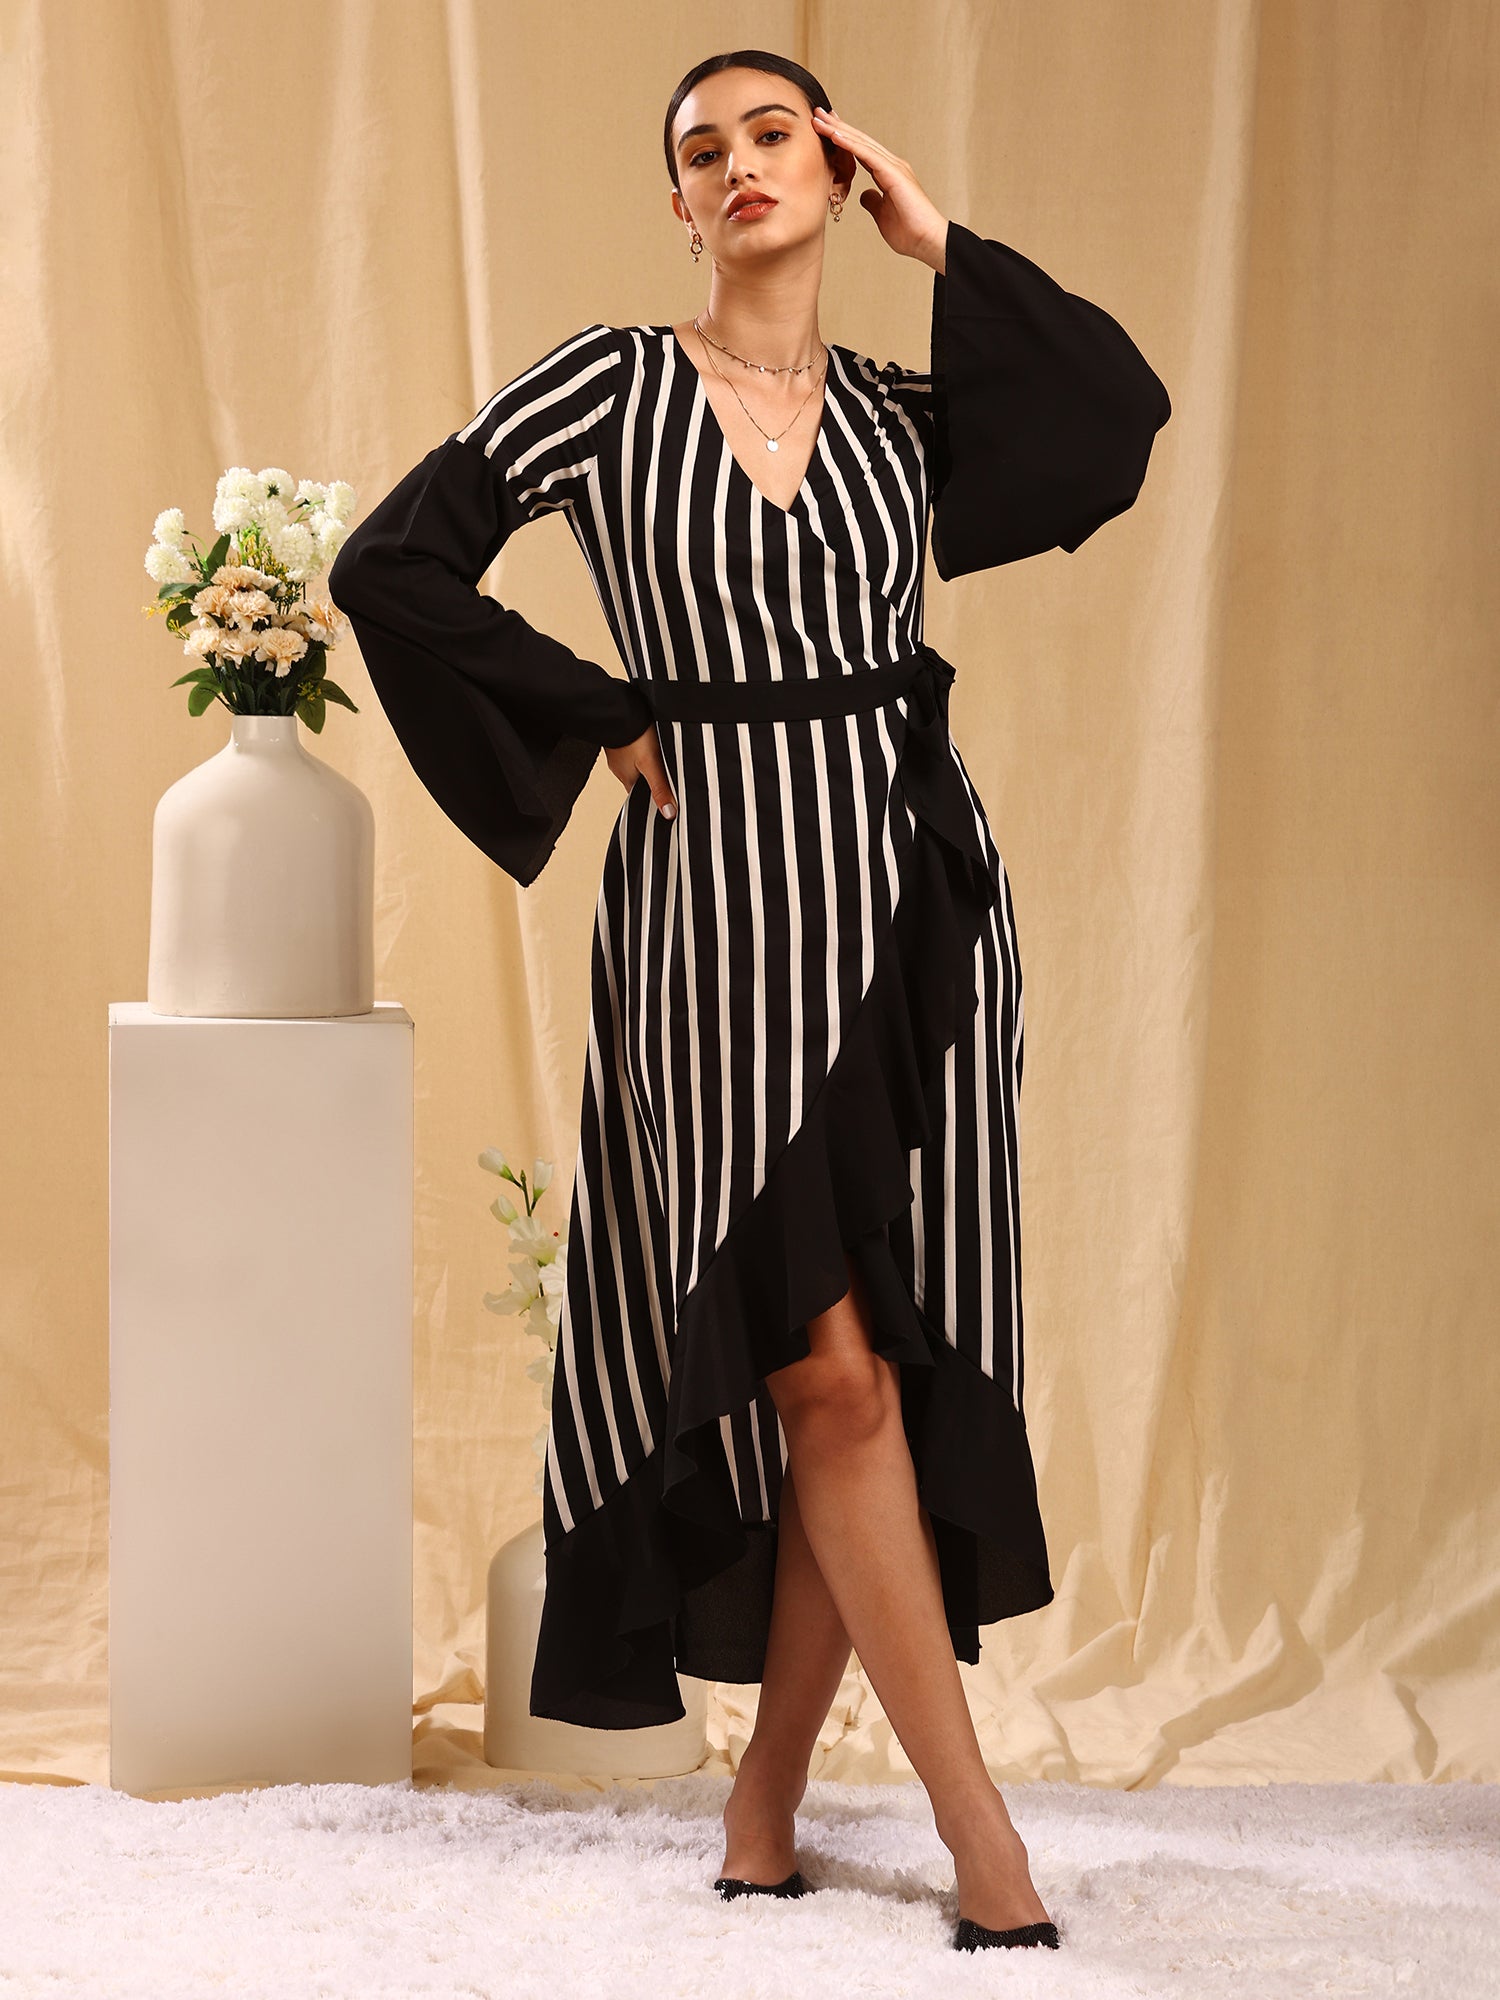 Womens Black and White Striped MAxi Dress with 3/4 Sleeves | Maxi dress,  Modest maxi dress, Striped maxi dresses